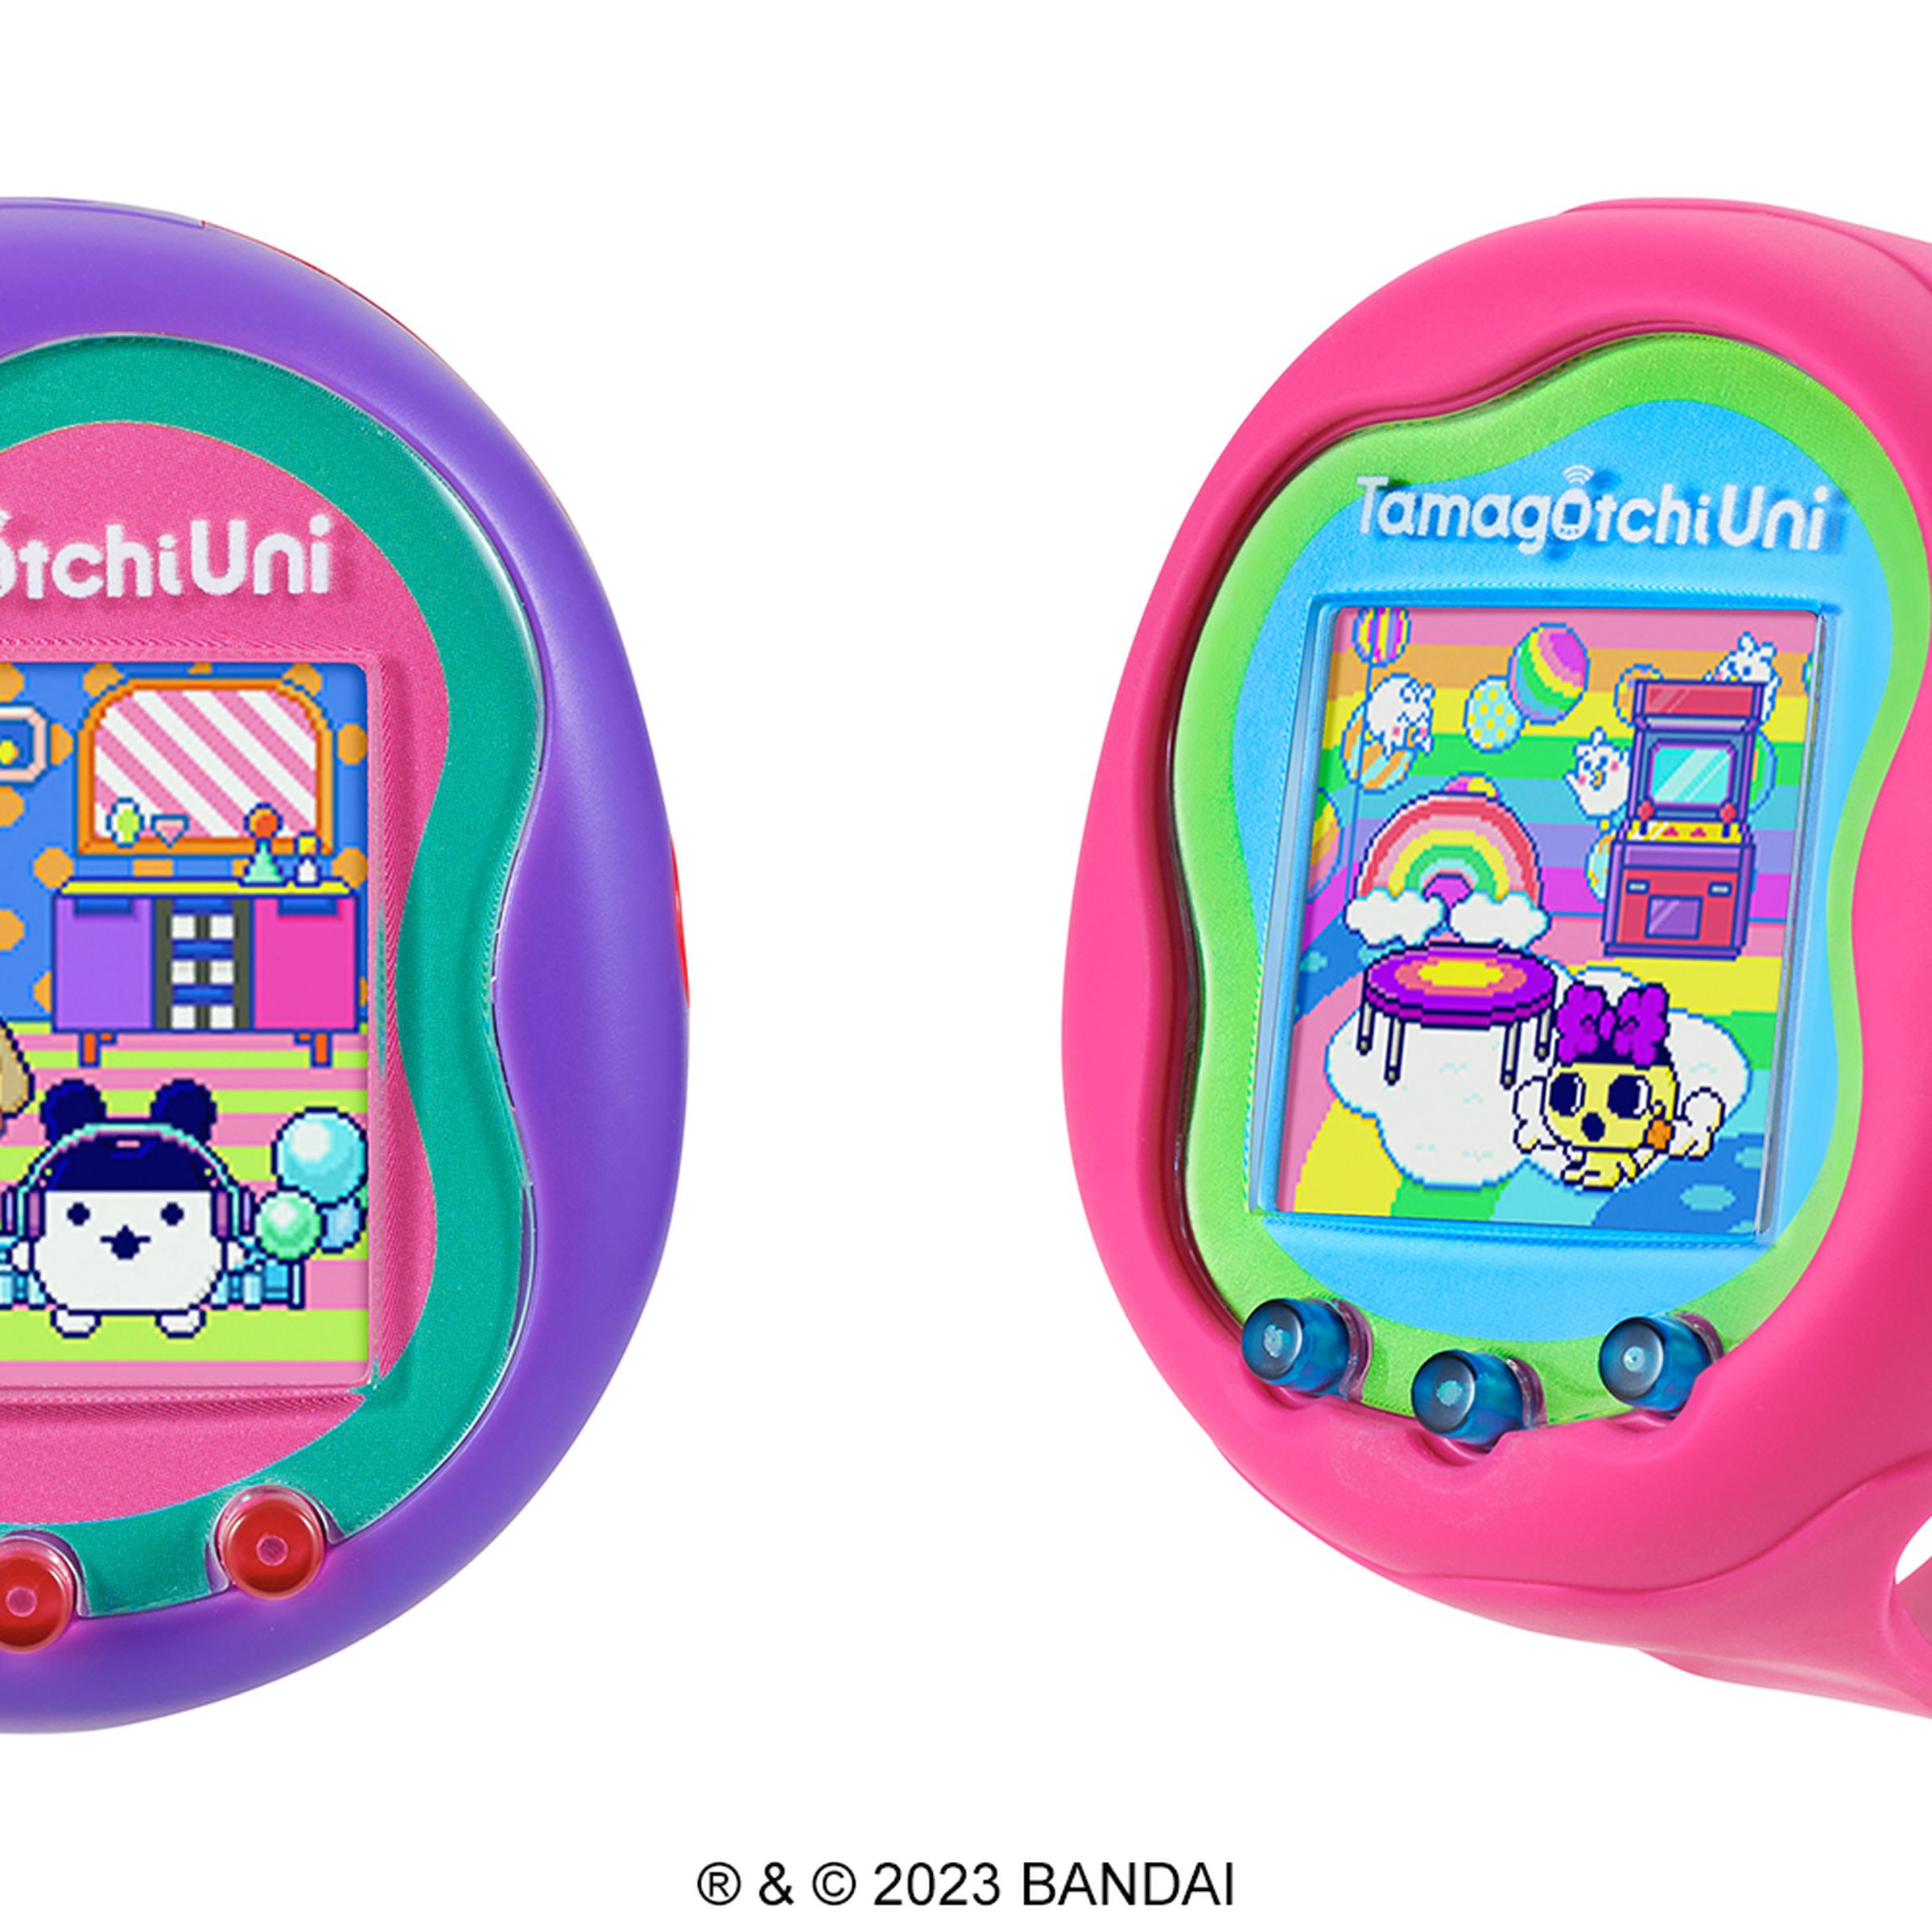 The new Tamagotchi Uni and one in the wristband case.